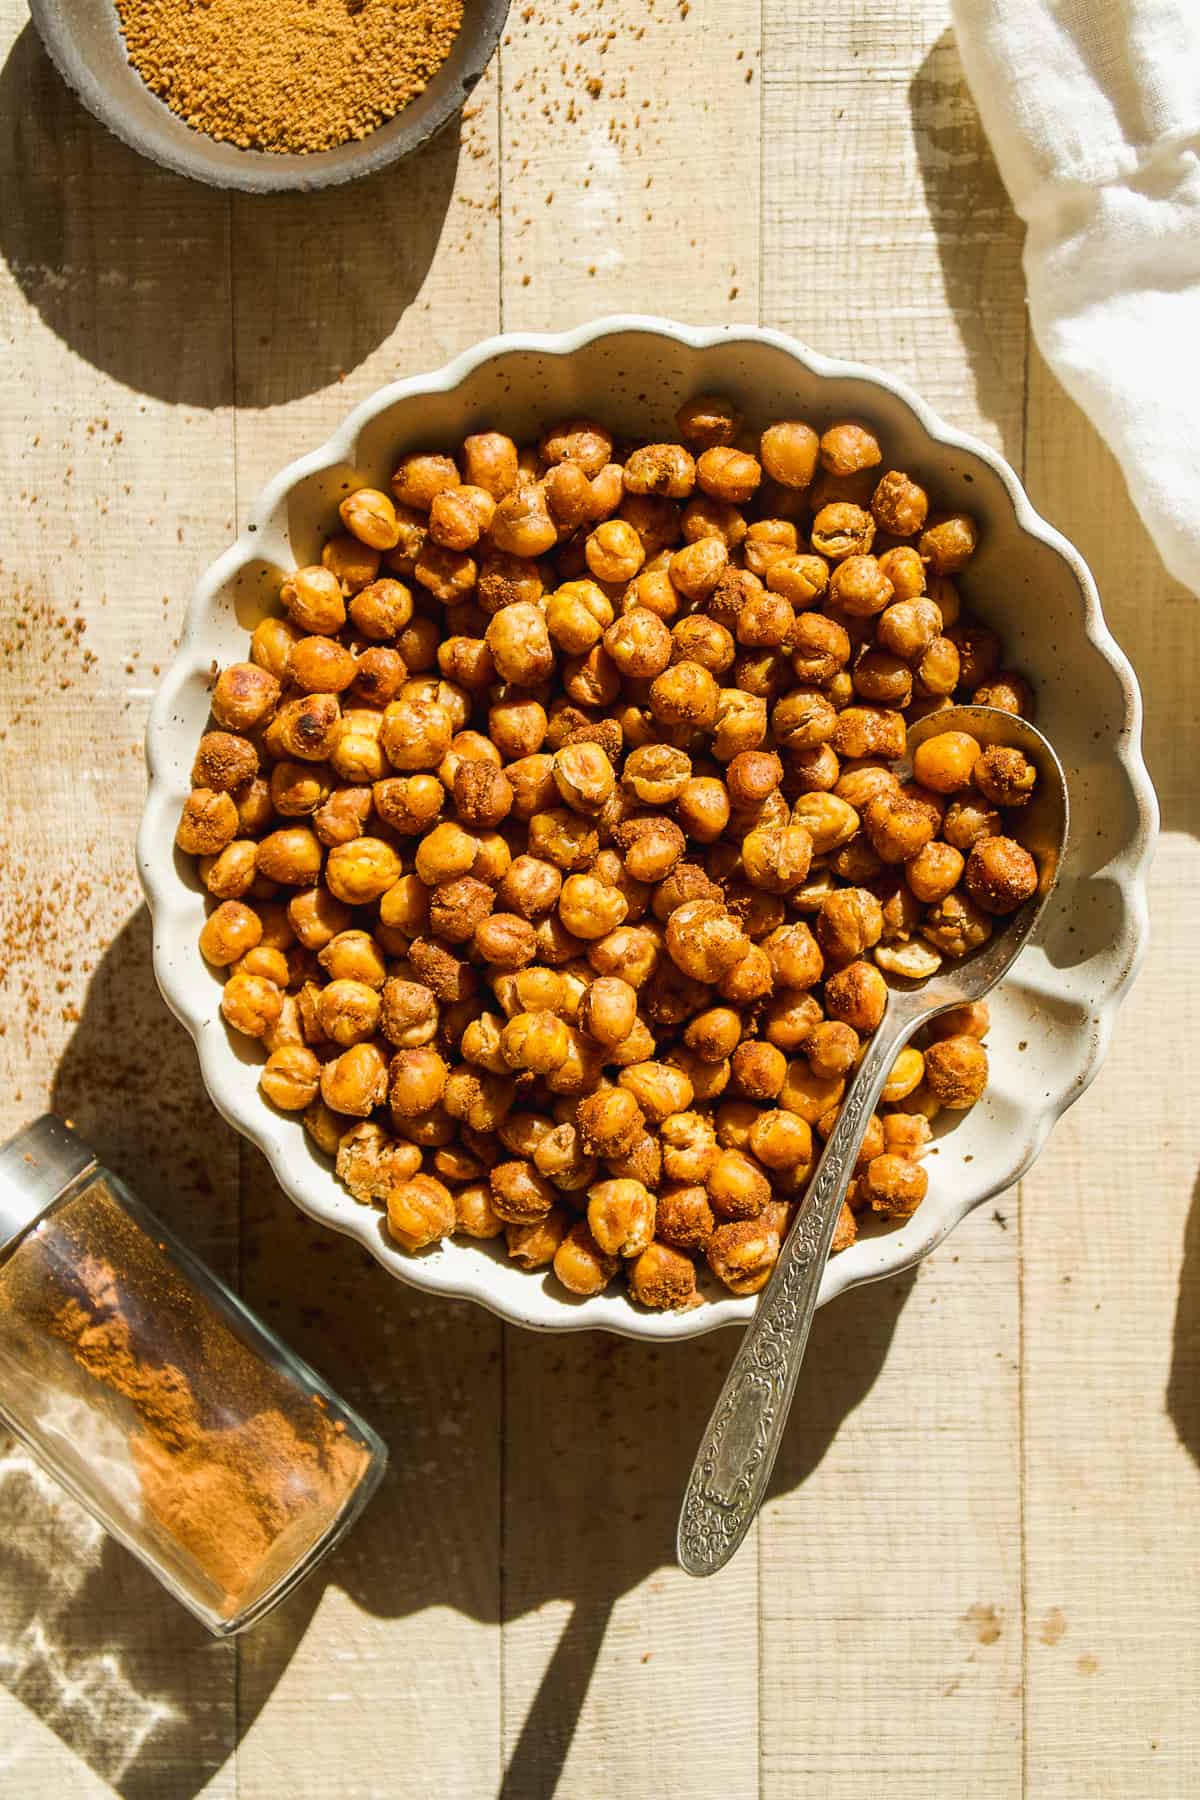 Cinnamon sugar roasted chickpeas in a bowl with cinnamon dusted on the surface.